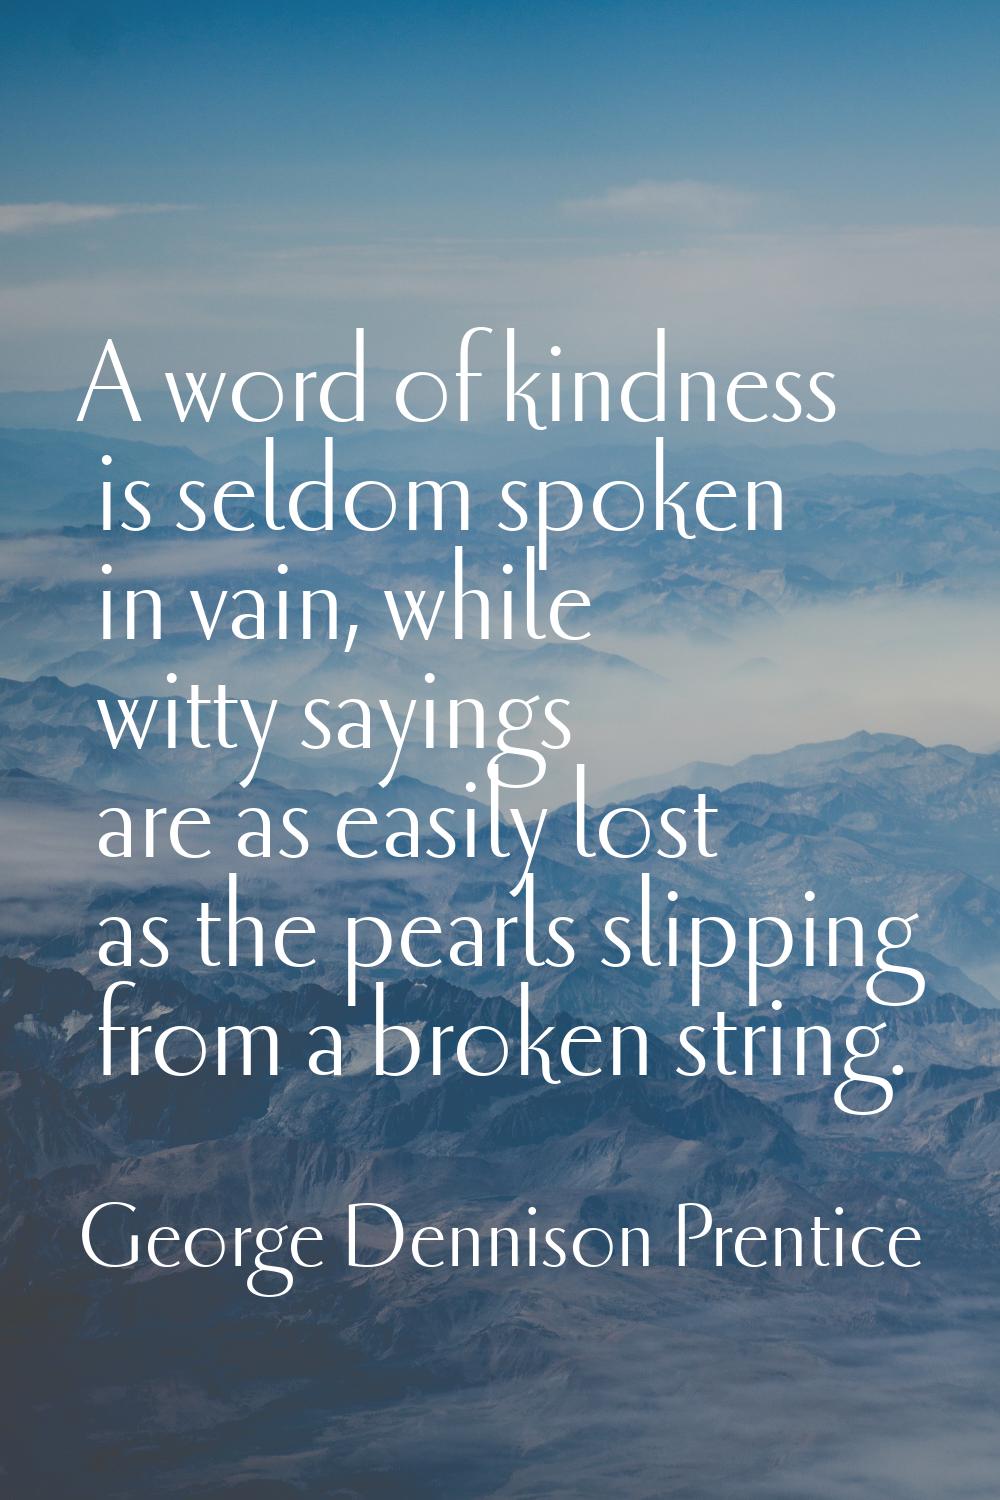 A word of kindness is seldom spoken in vain, while witty sayings are as easily lost as the pearls s